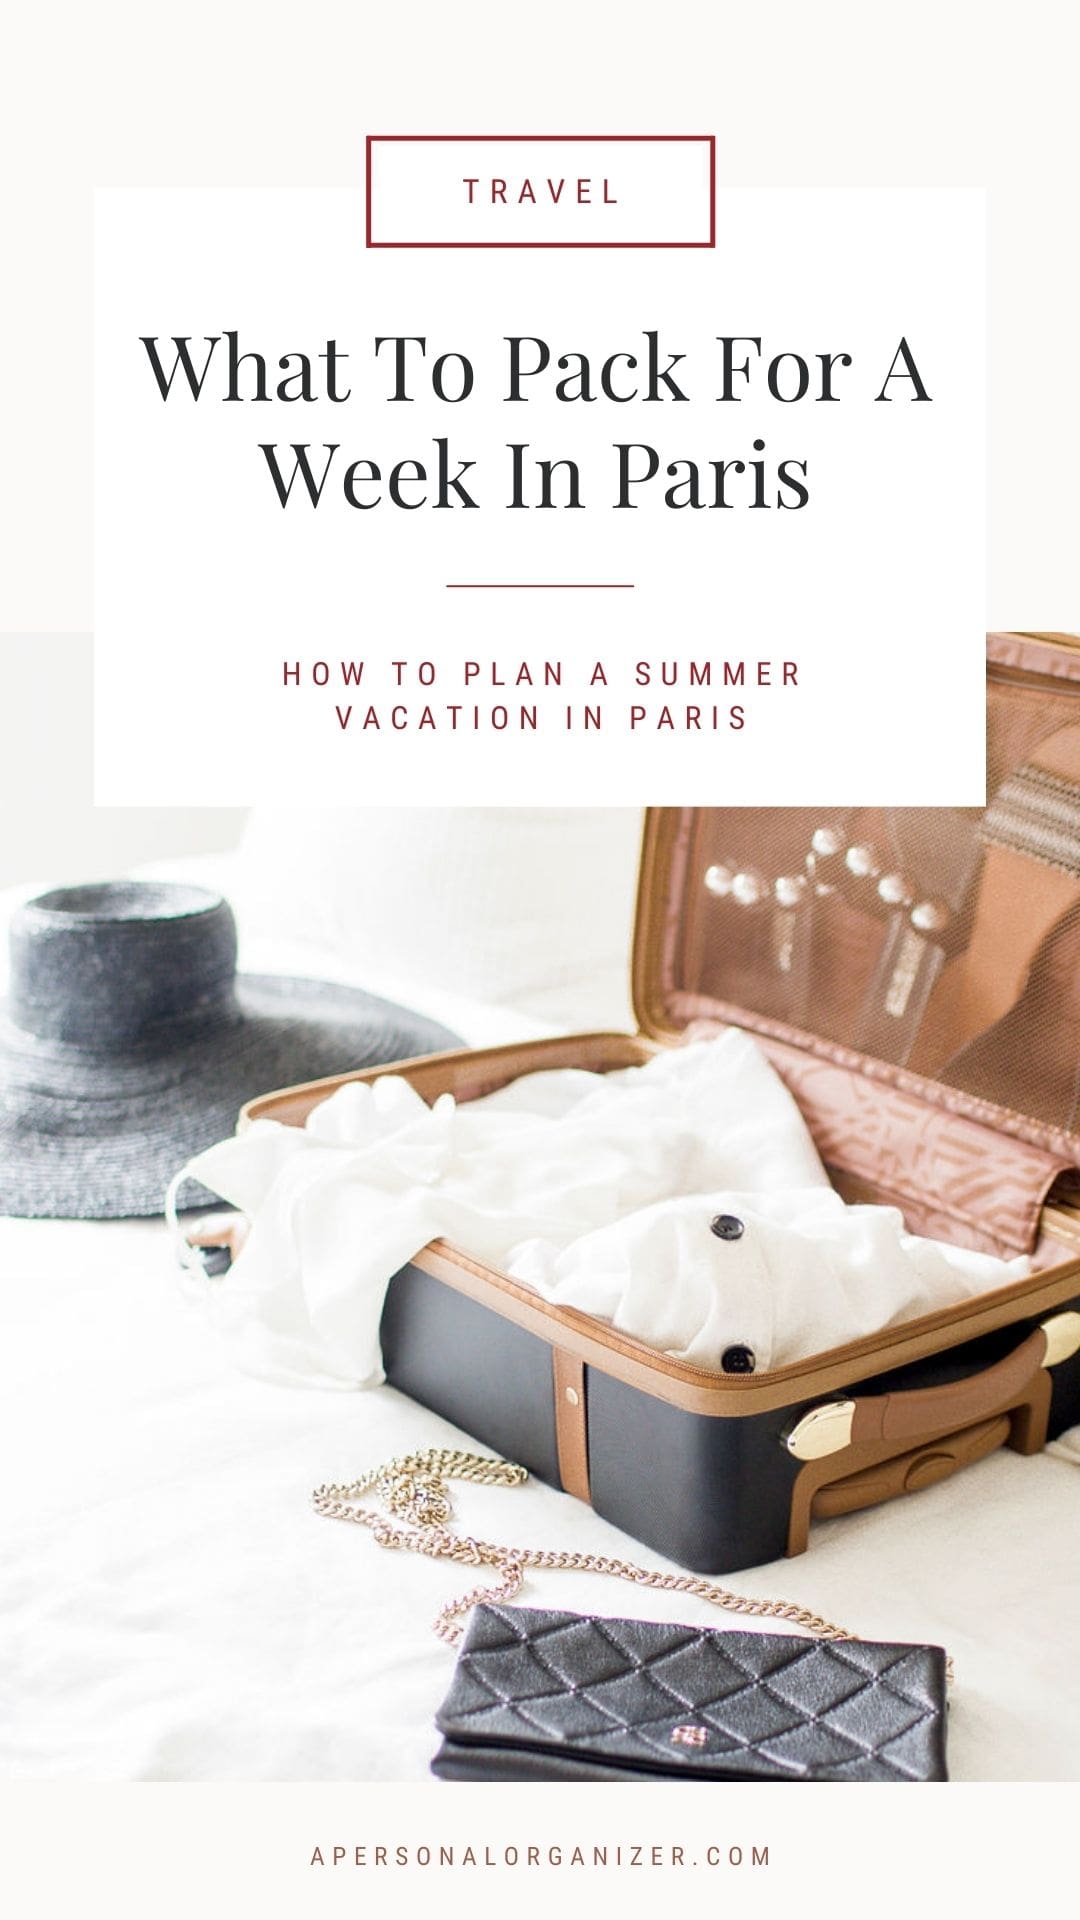 Paris is amazing and here are the best tips on what to pack for a summer week in Paris and make the most of your trip. Travel Checklist.